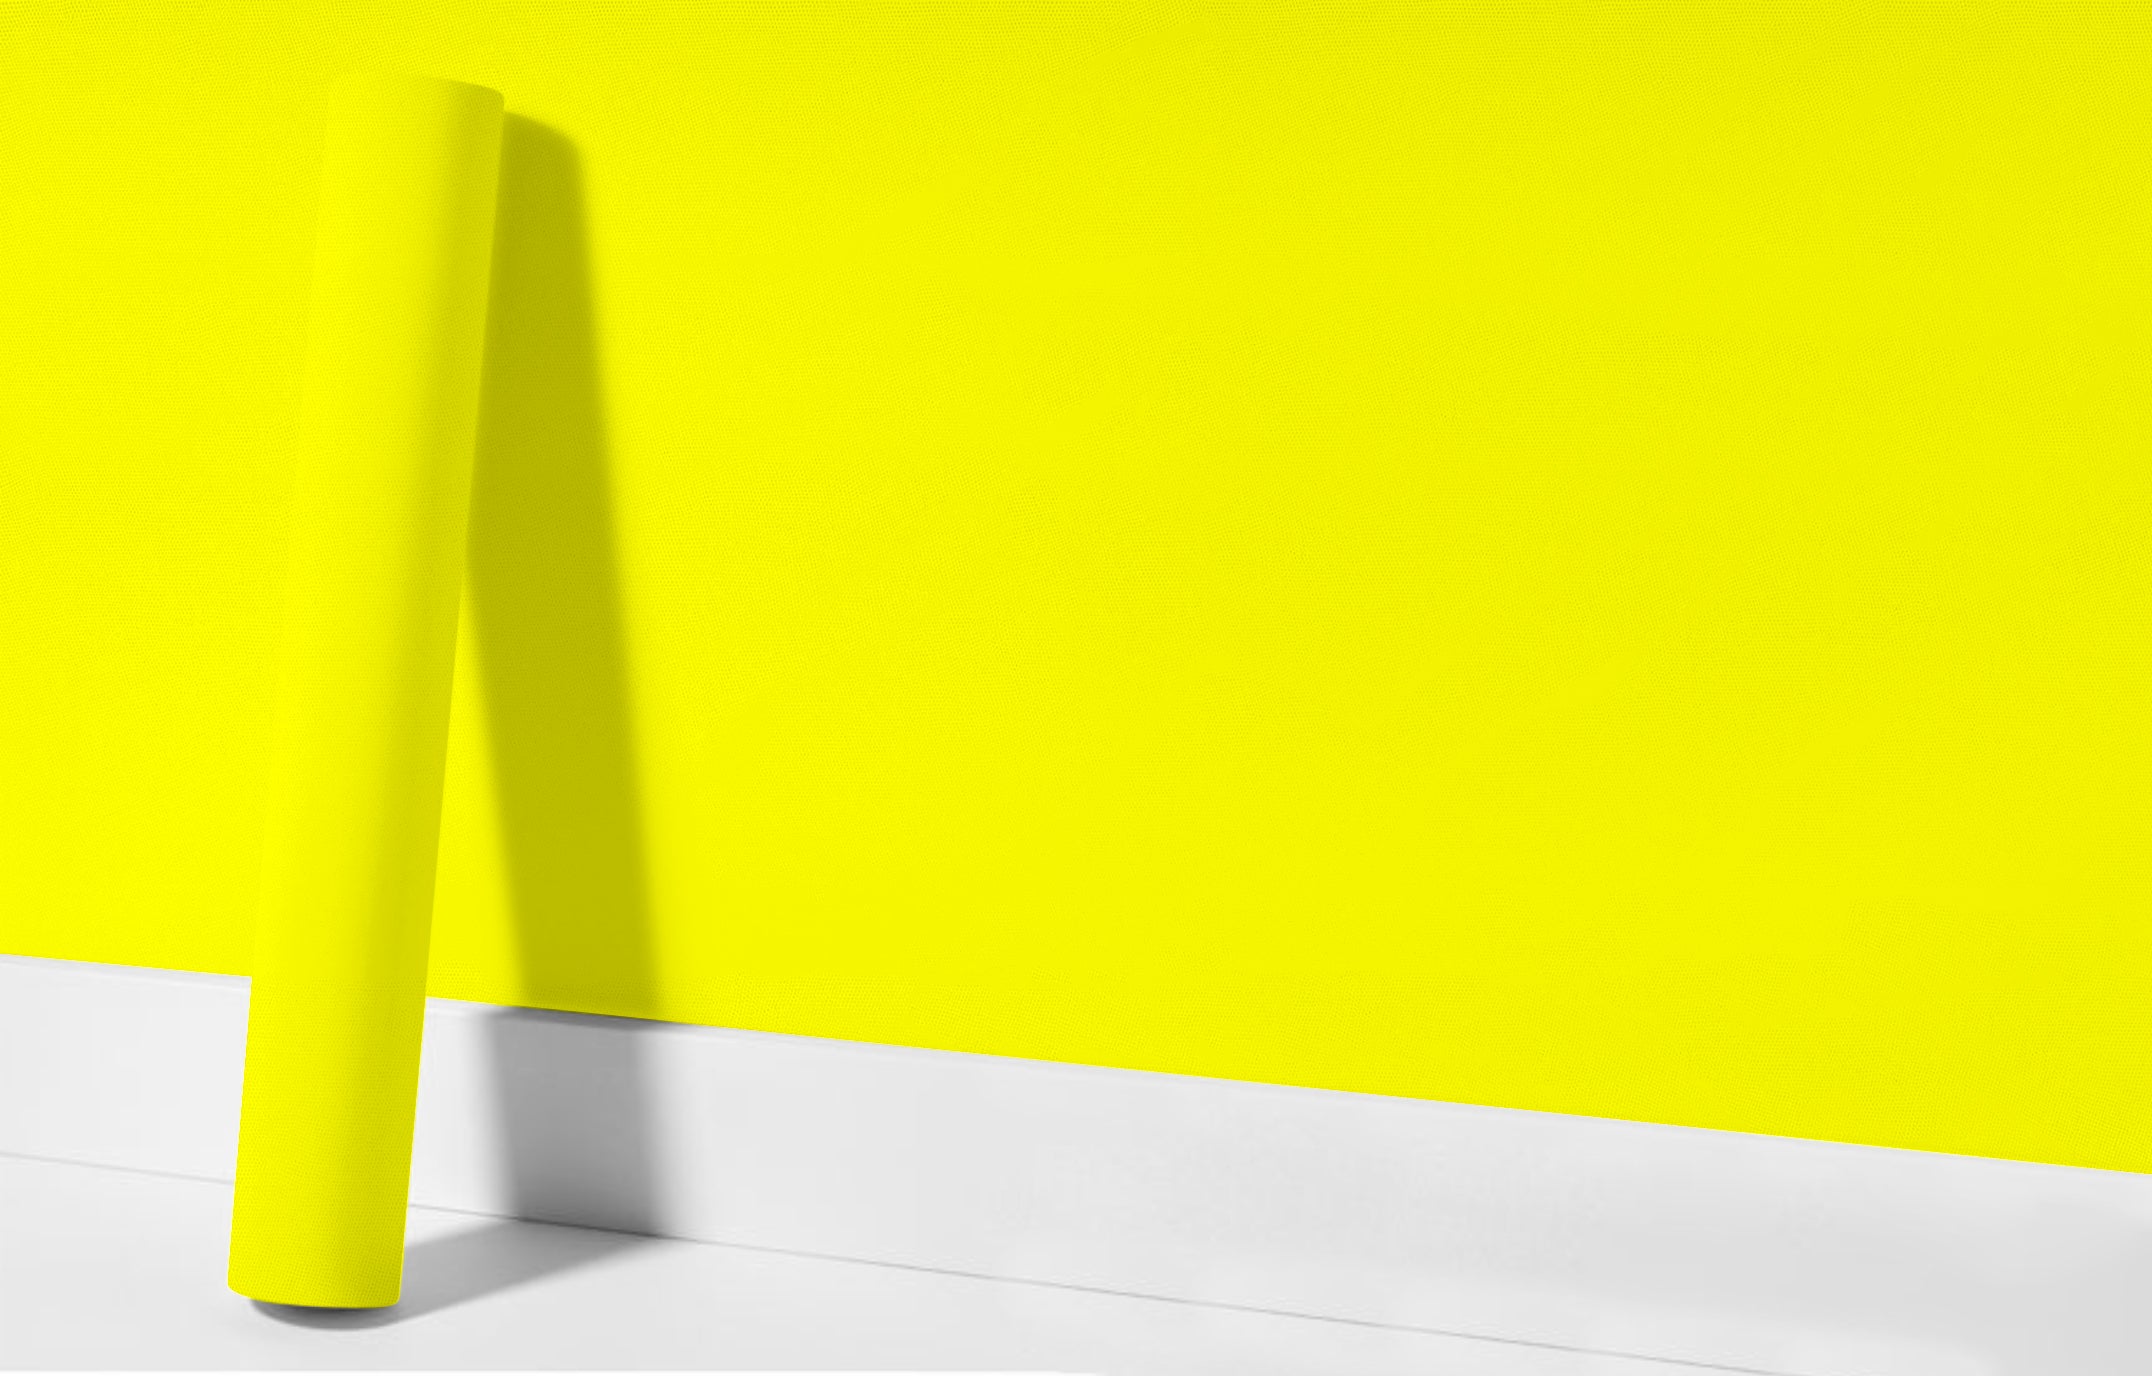 Peel & Stick Removable Re-usable Paint - Color RAL 1026 Luminous Yellow - offRAL™ - RALRAW LLC, USA